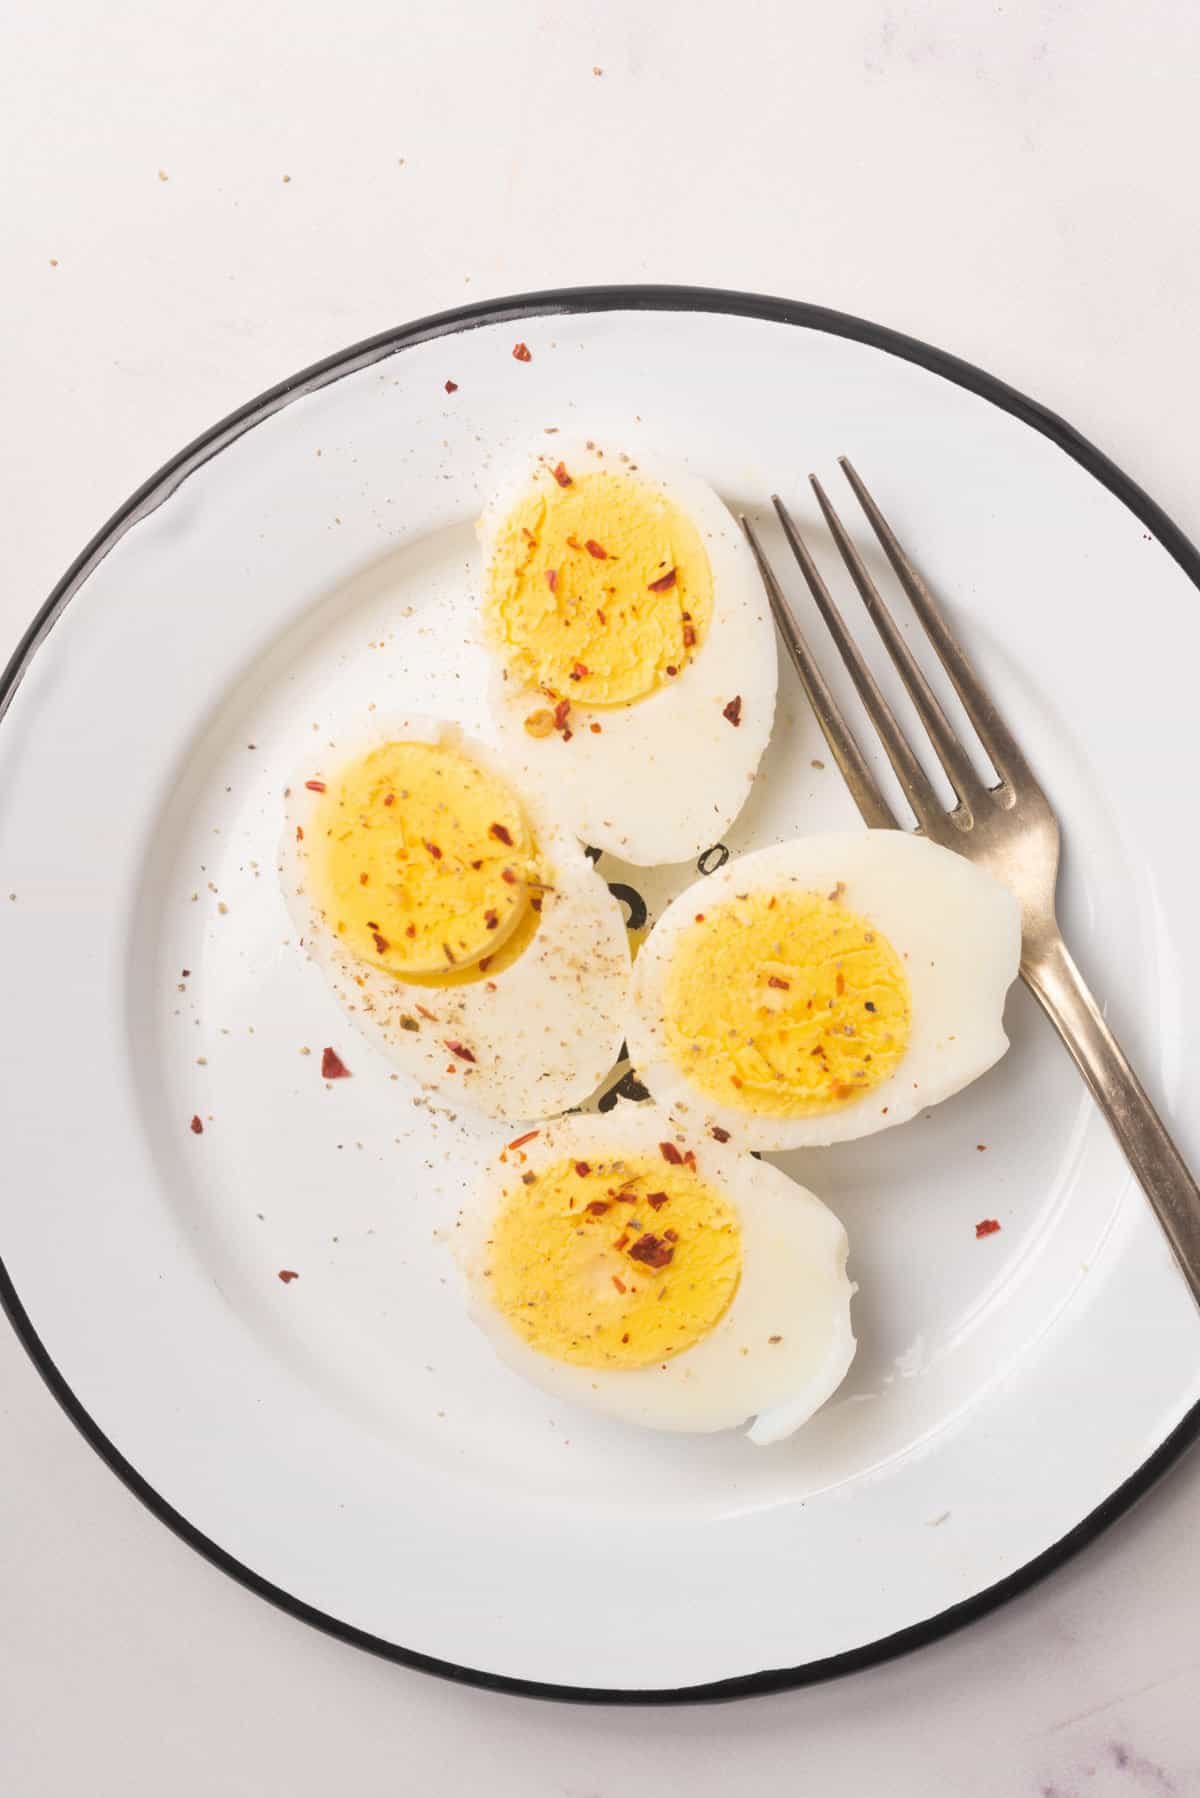 An image of two hard boiled eggs sliced in half, topped with seasonings, and being served on a plate with a fork beside them.